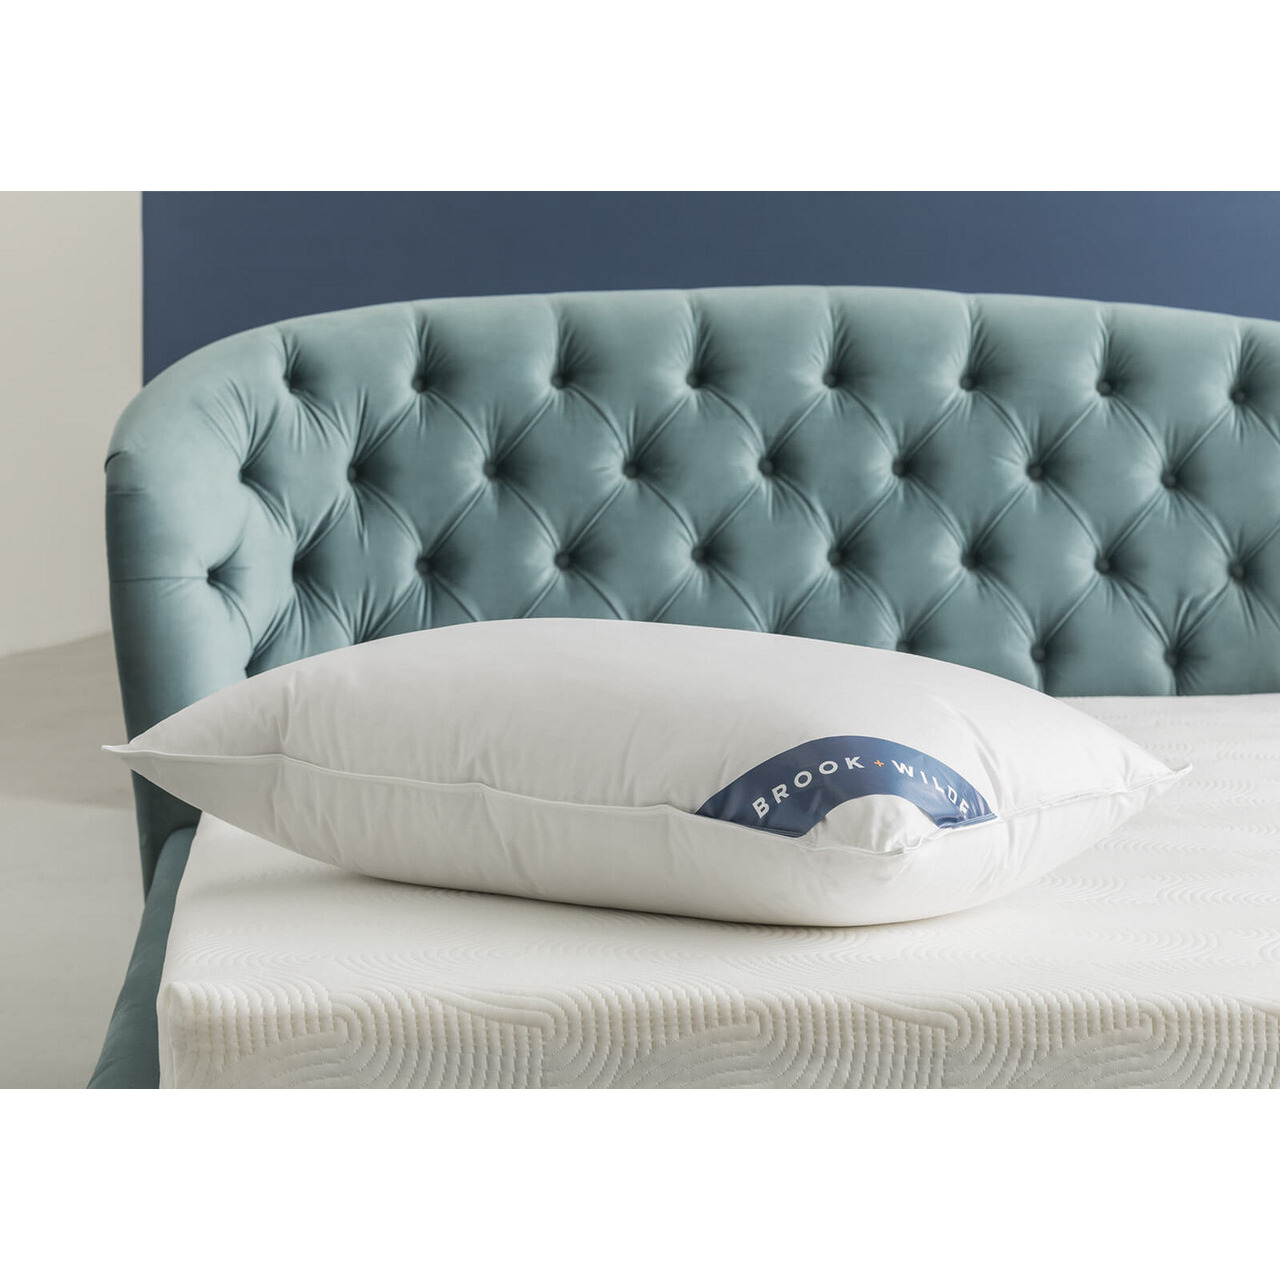 Luxury Duck Down Pillow - Plush Support for a Restful Night's Sleep